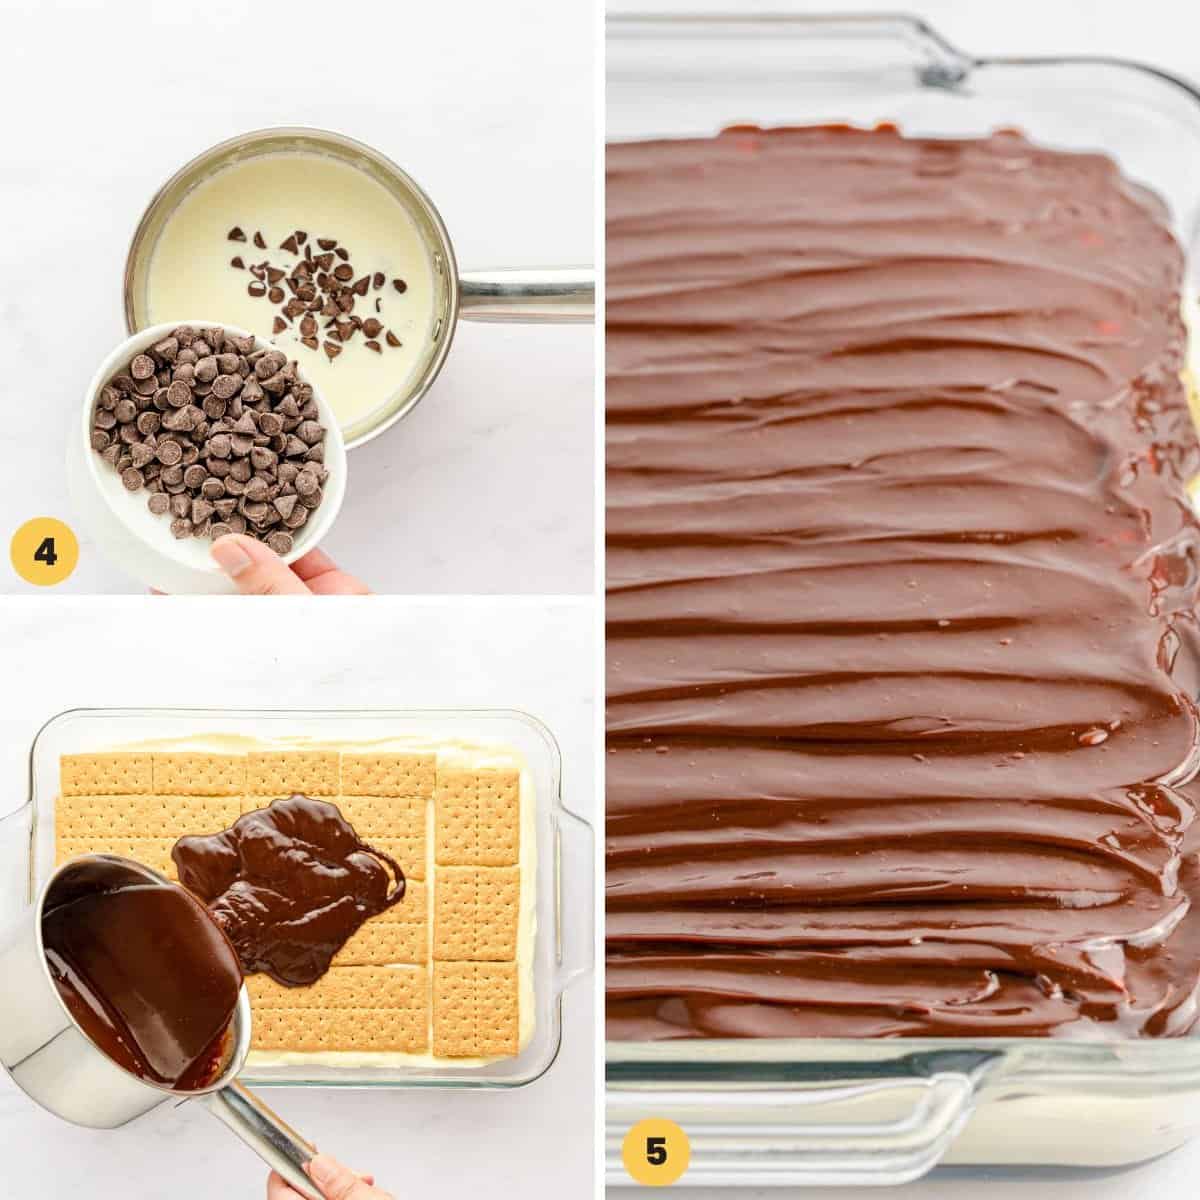 Collage of 3 images showing how to make a no bake eclair cake and cover it with ganache topping